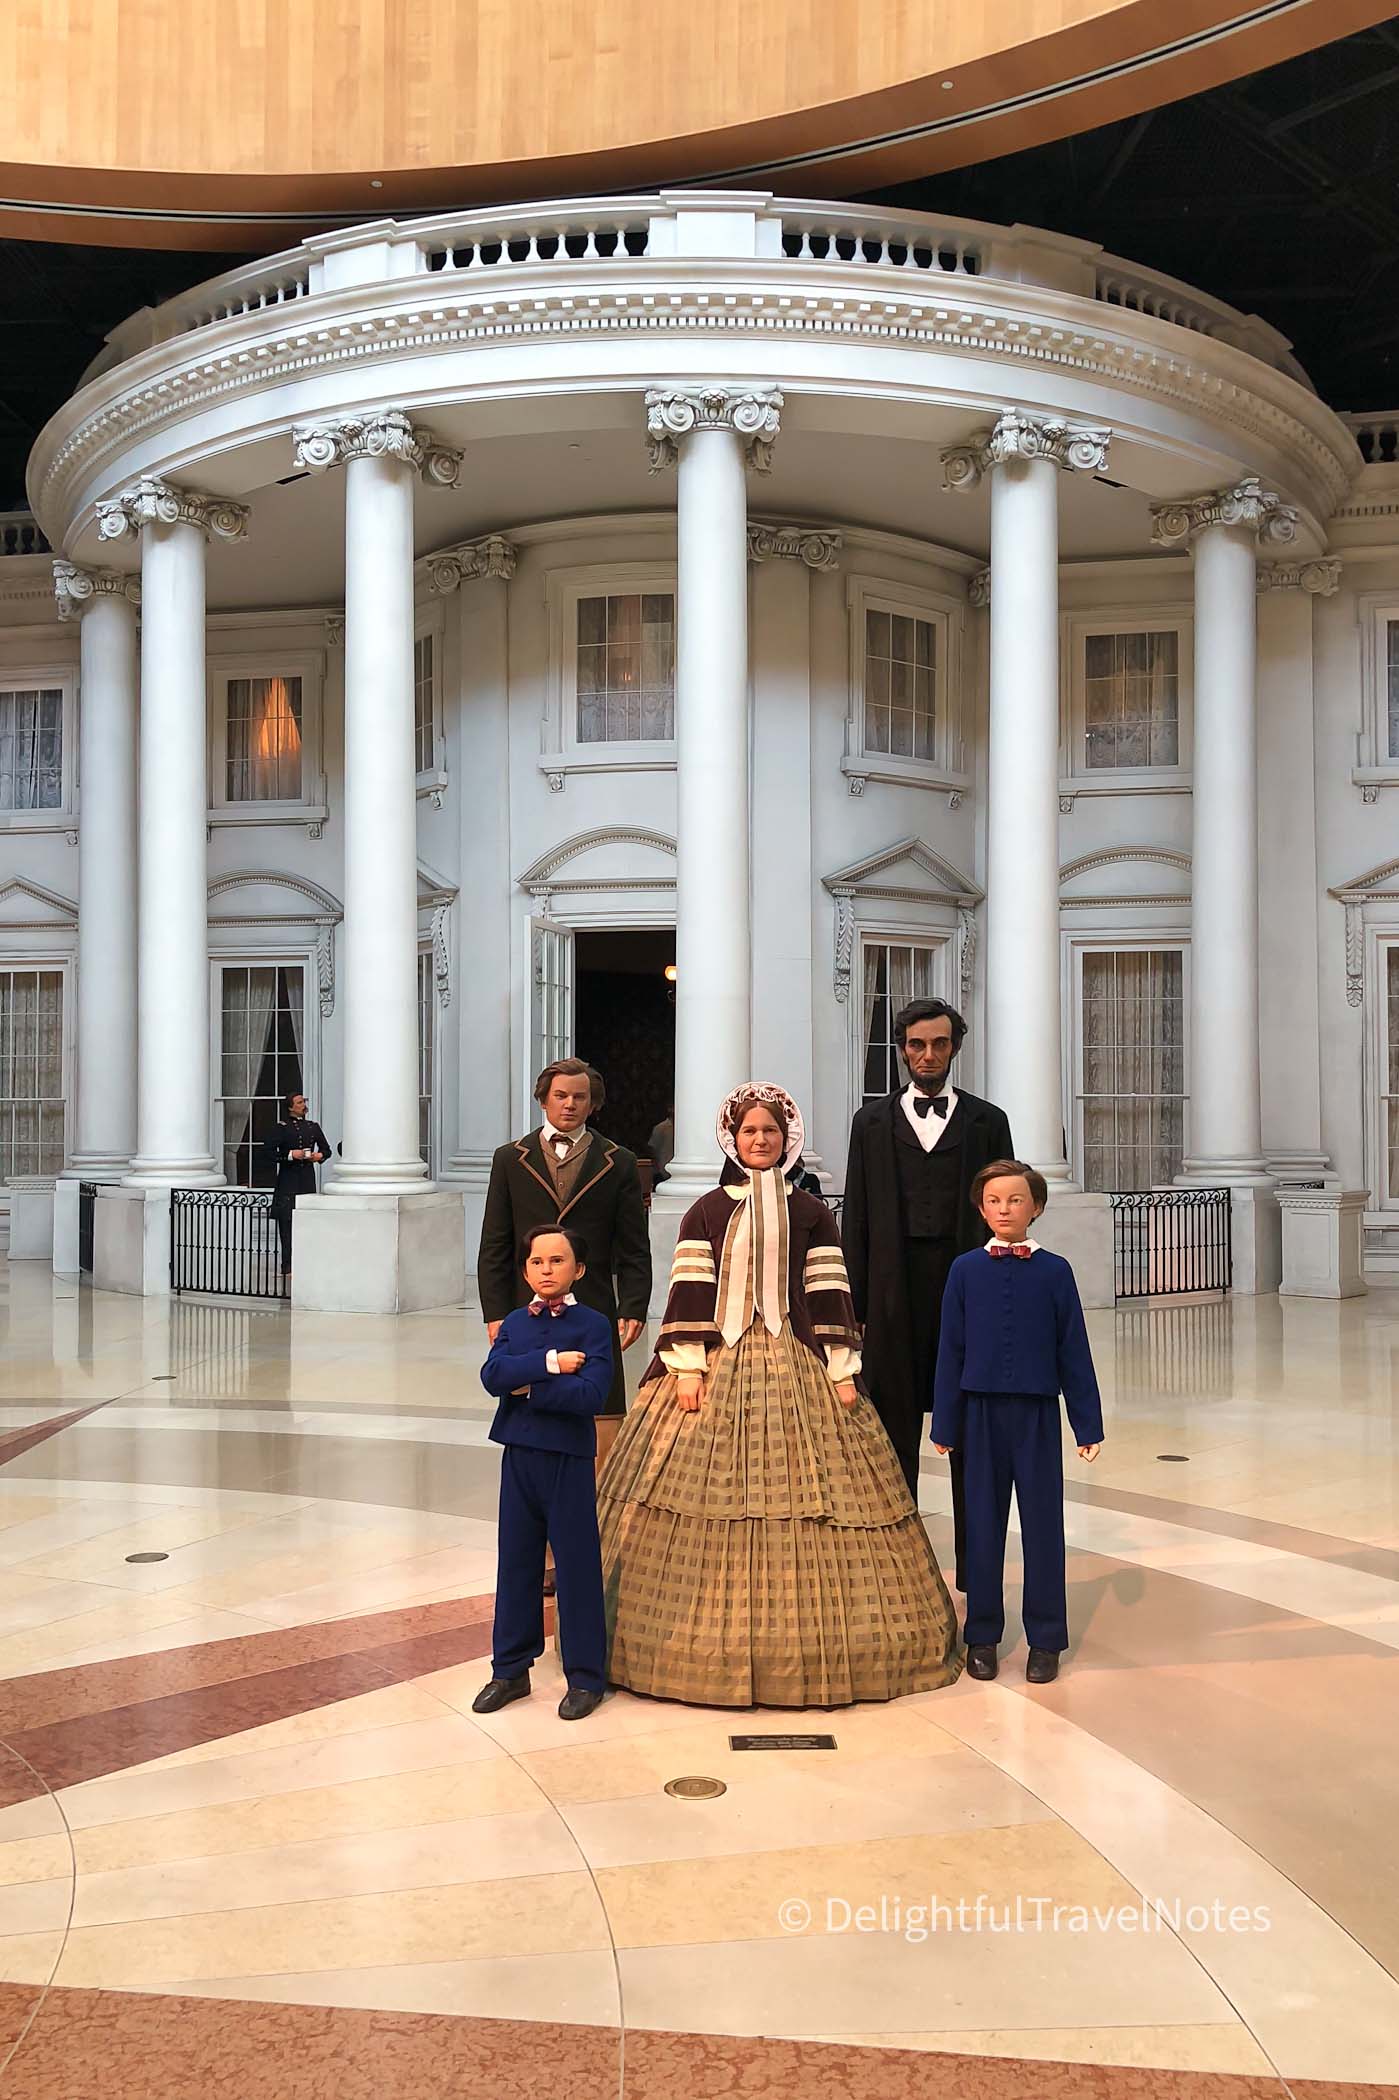 scene of Lincoln's family in front of the White House in Abraham Lincoln Presidential Library & Museum in Springfield Illinois.